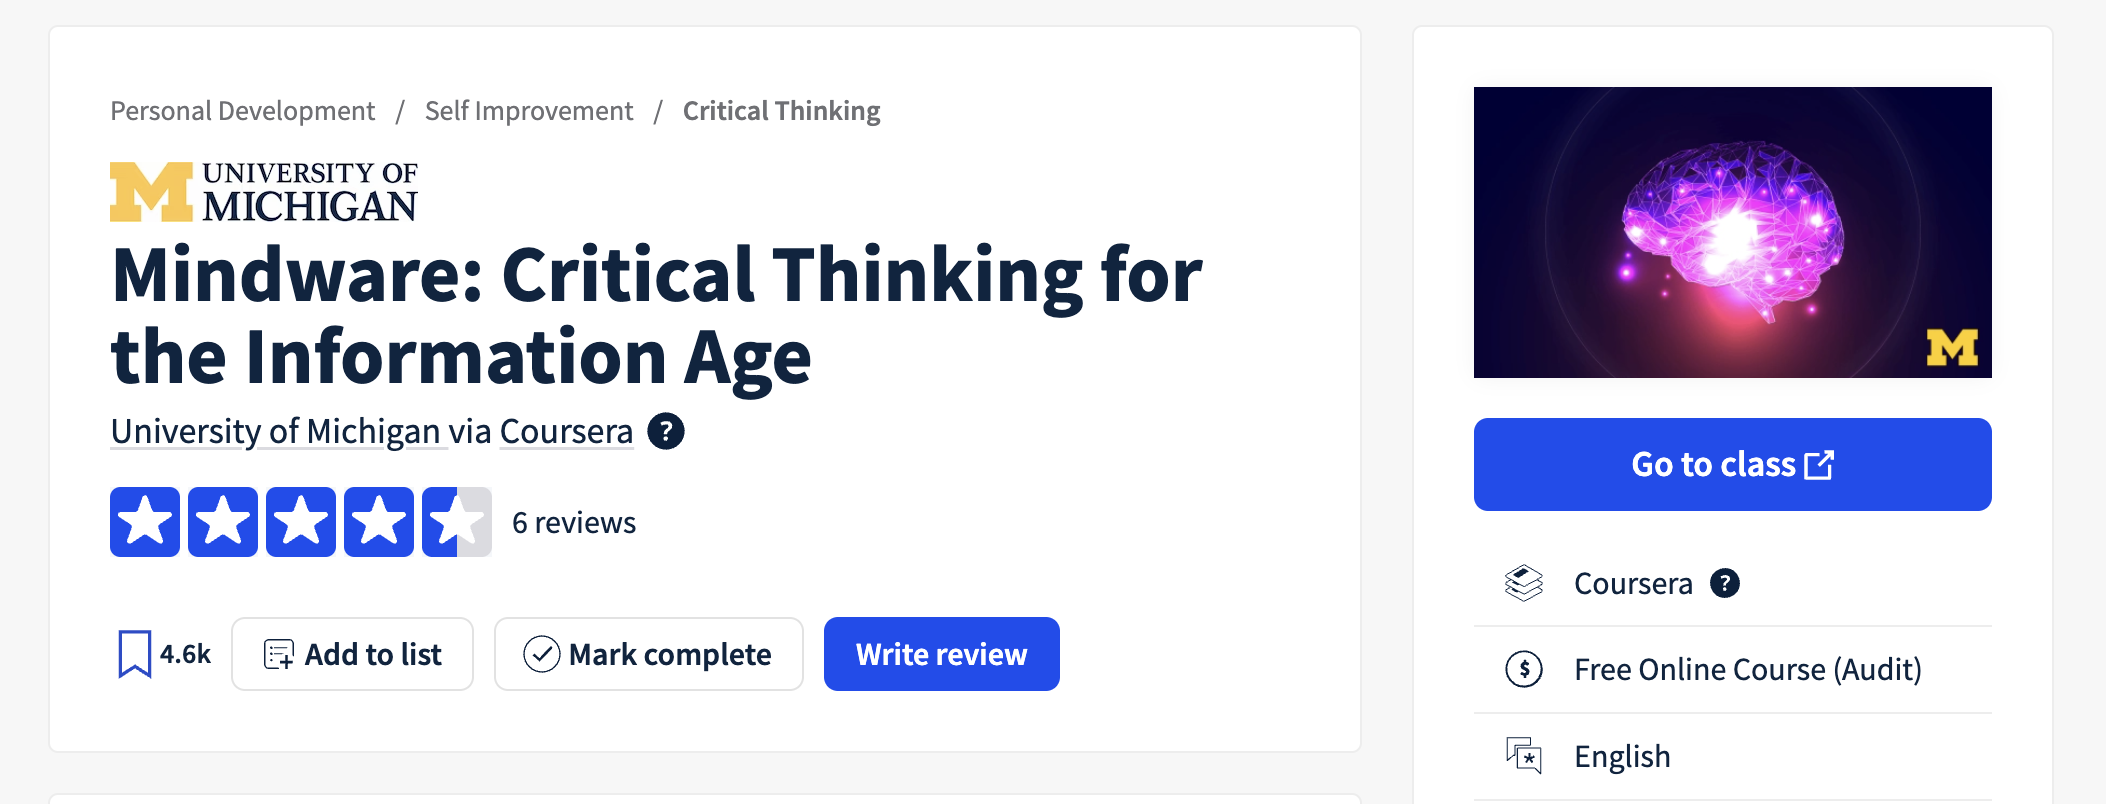 Mindware for Critical Thinking in the Information Age